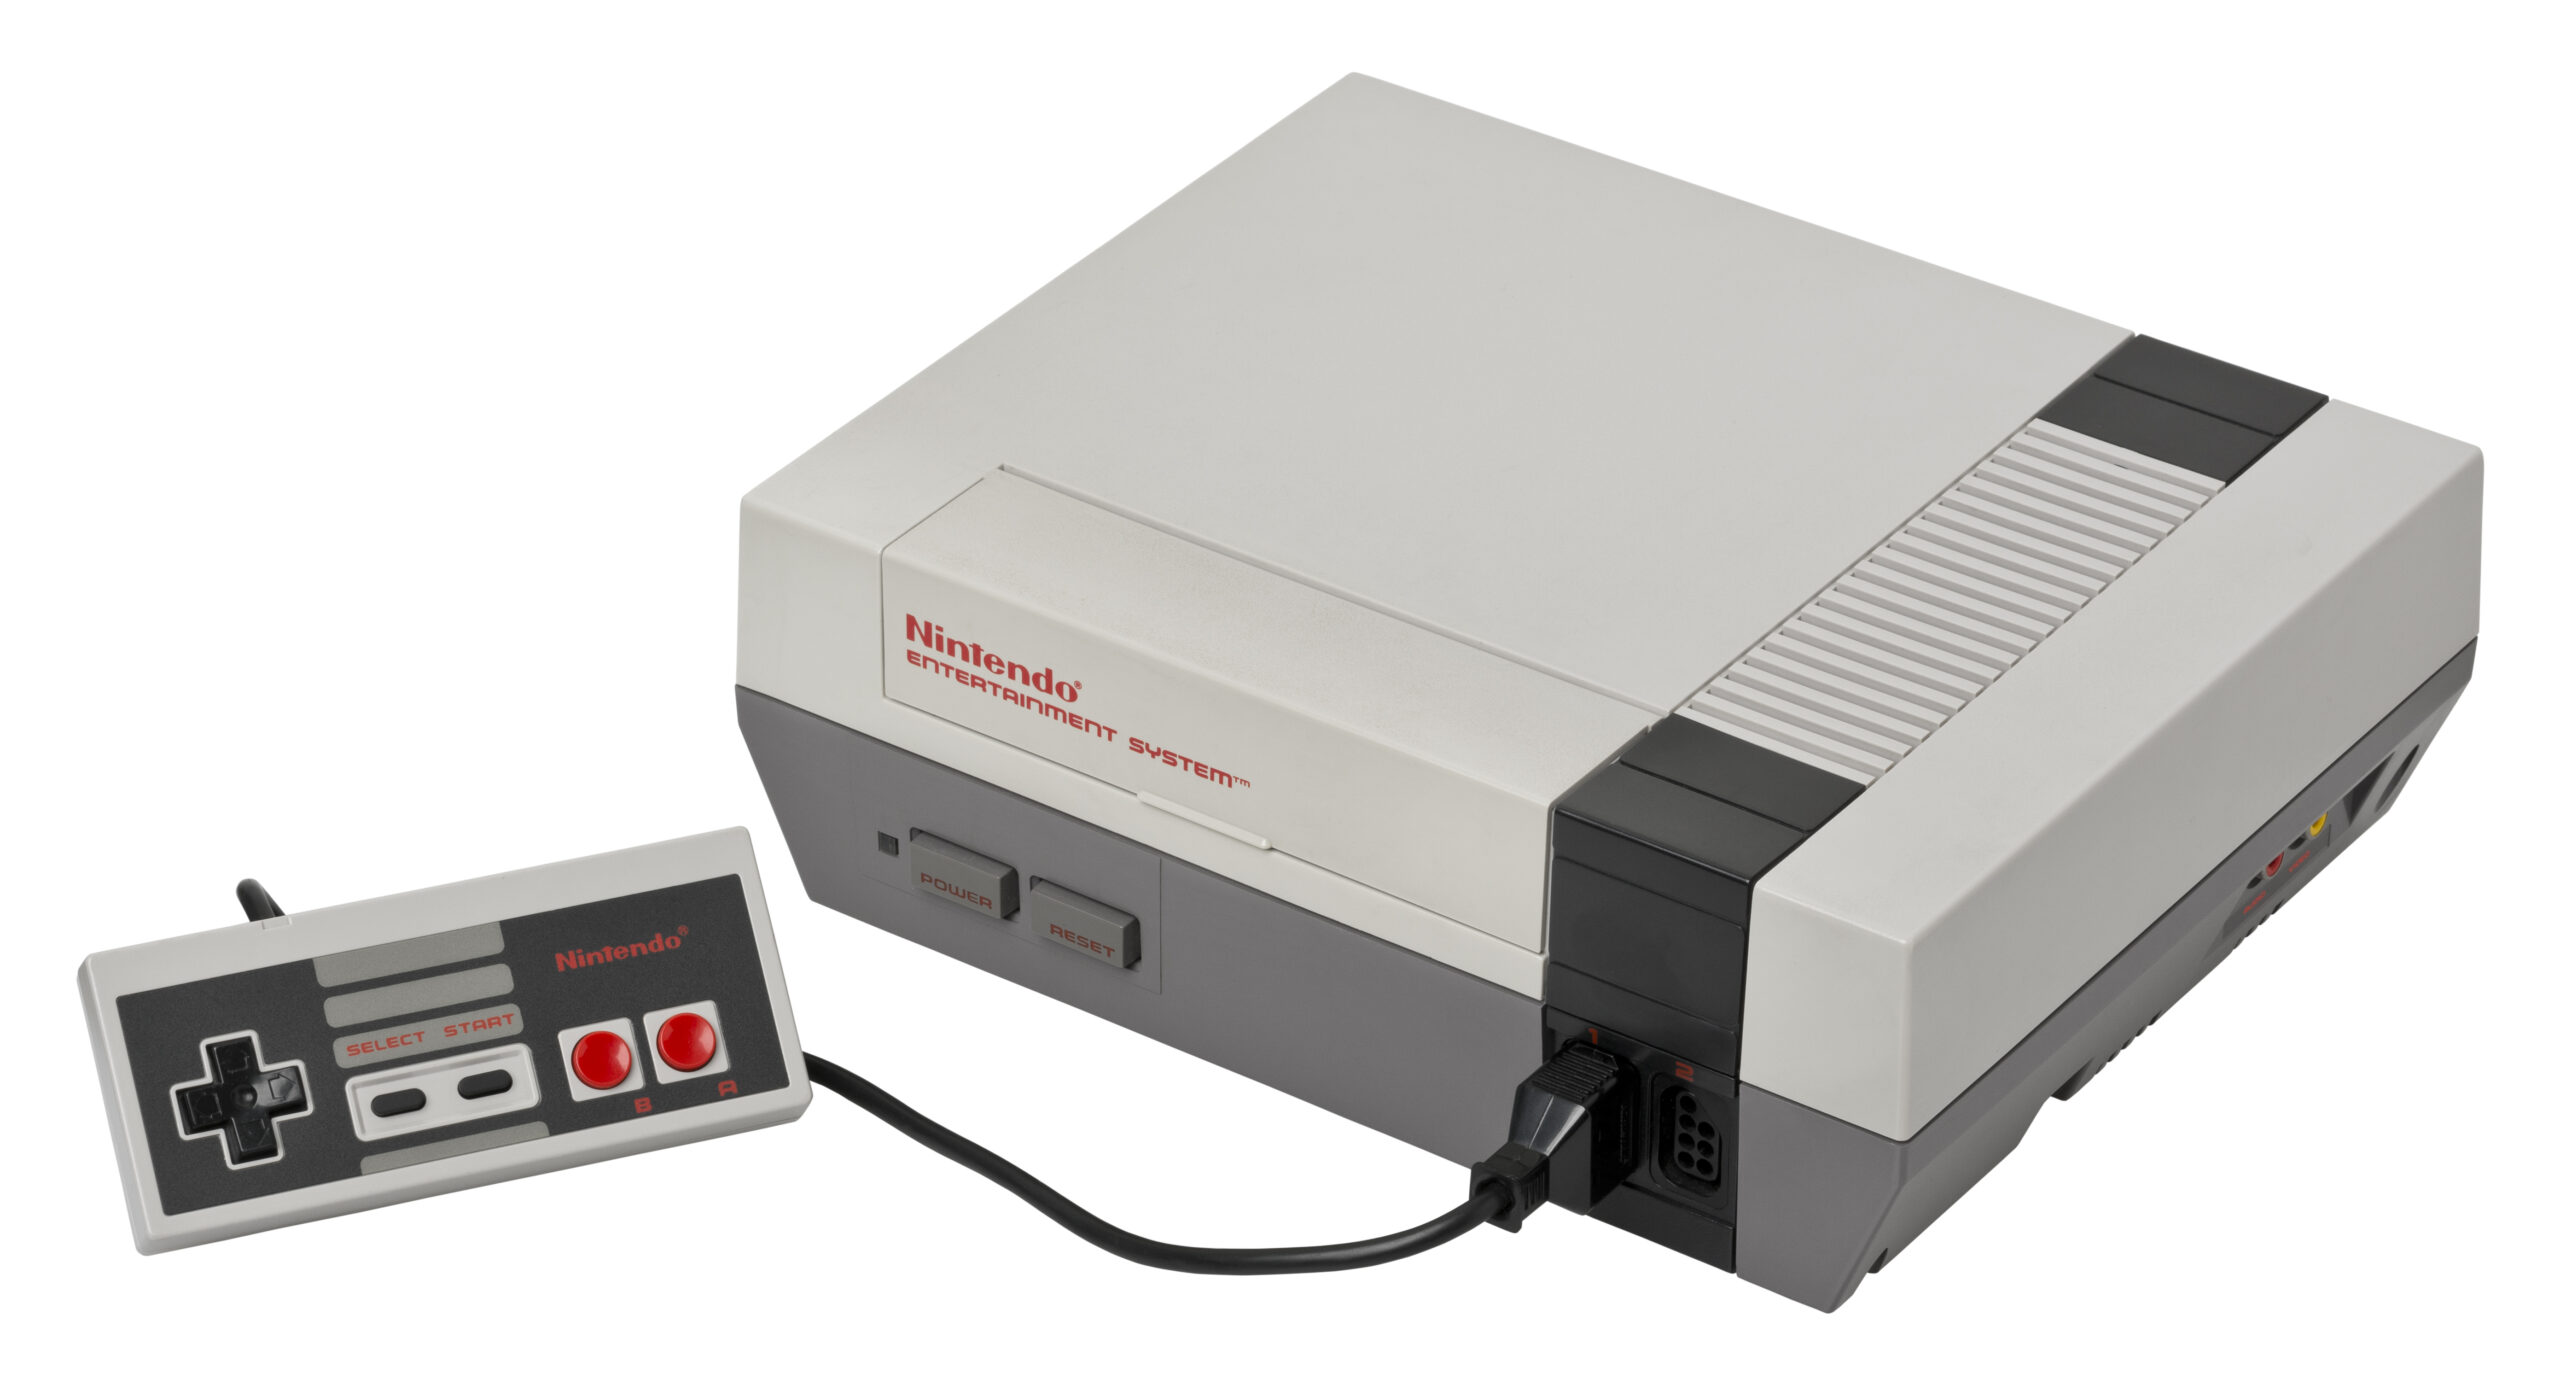 This Day in Gaming History – The Nintendo Entertainment System is released in the U.S. (October 18, 1985)